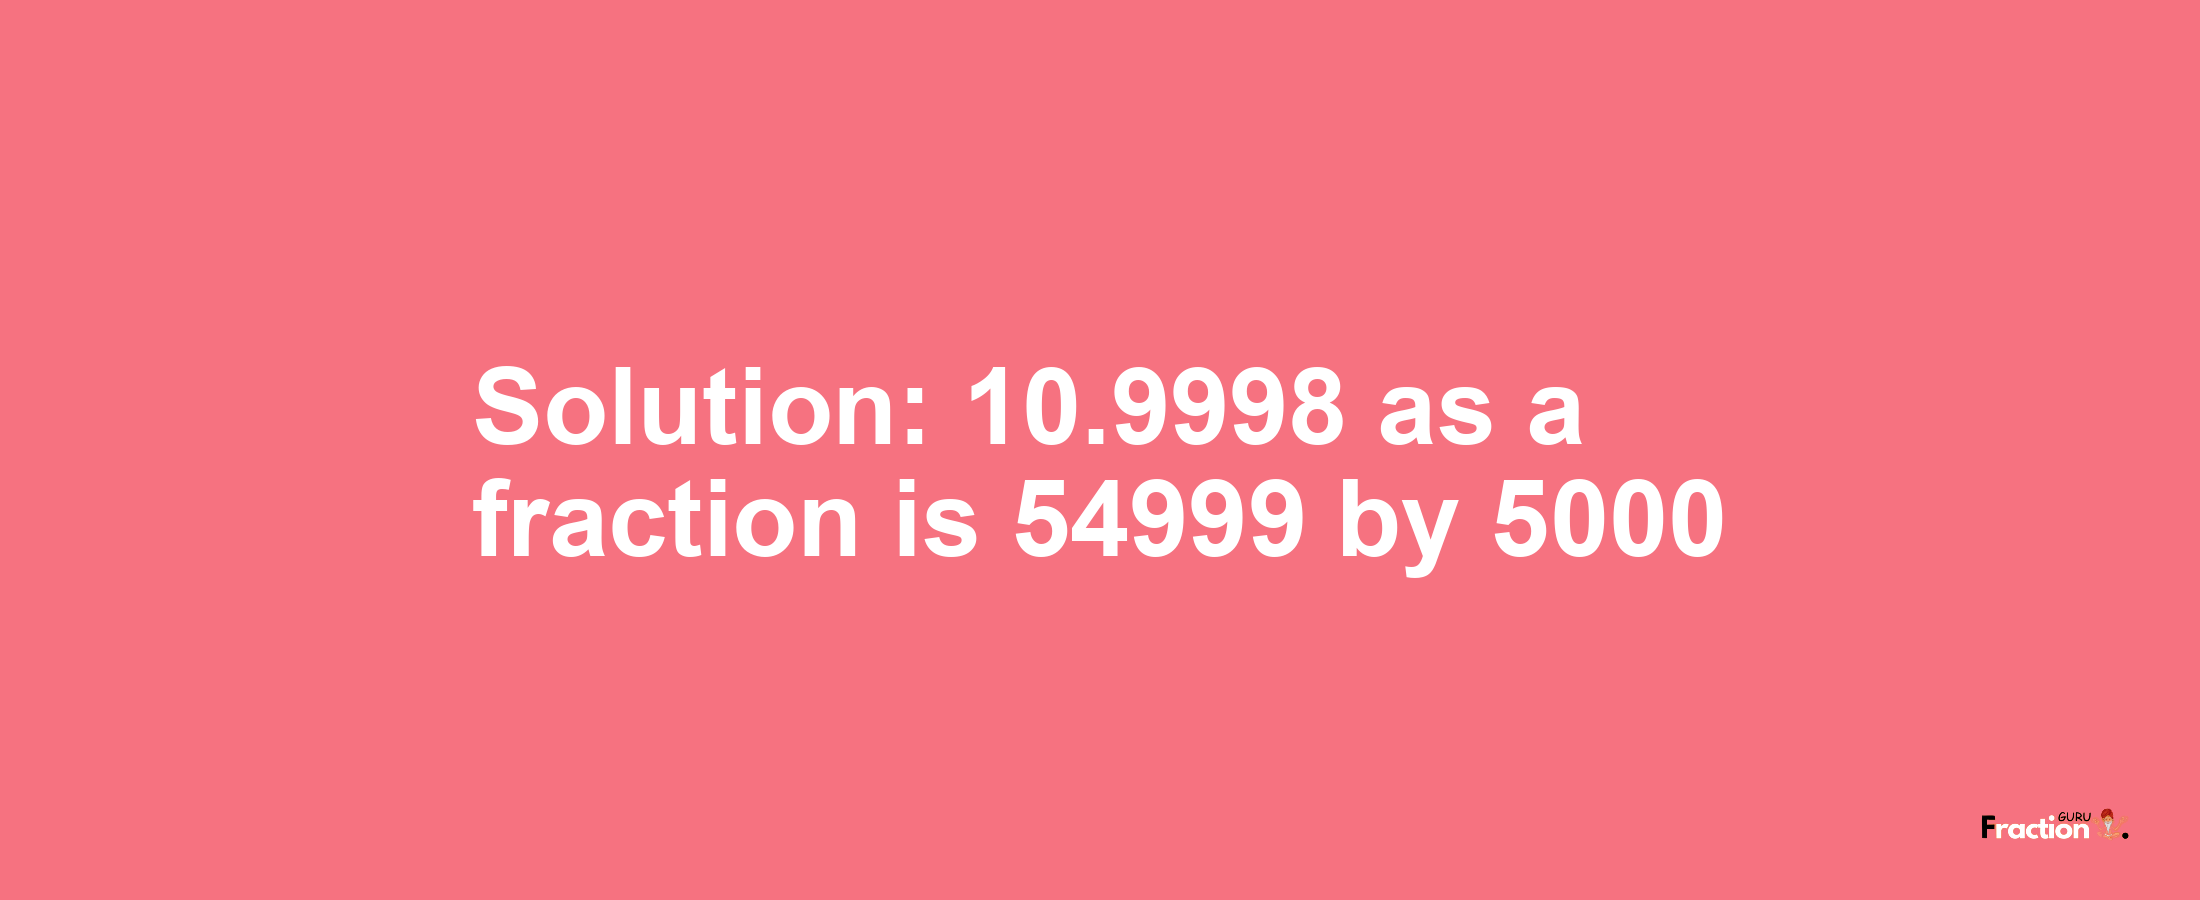 Solution:10.9998 as a fraction is 54999/5000